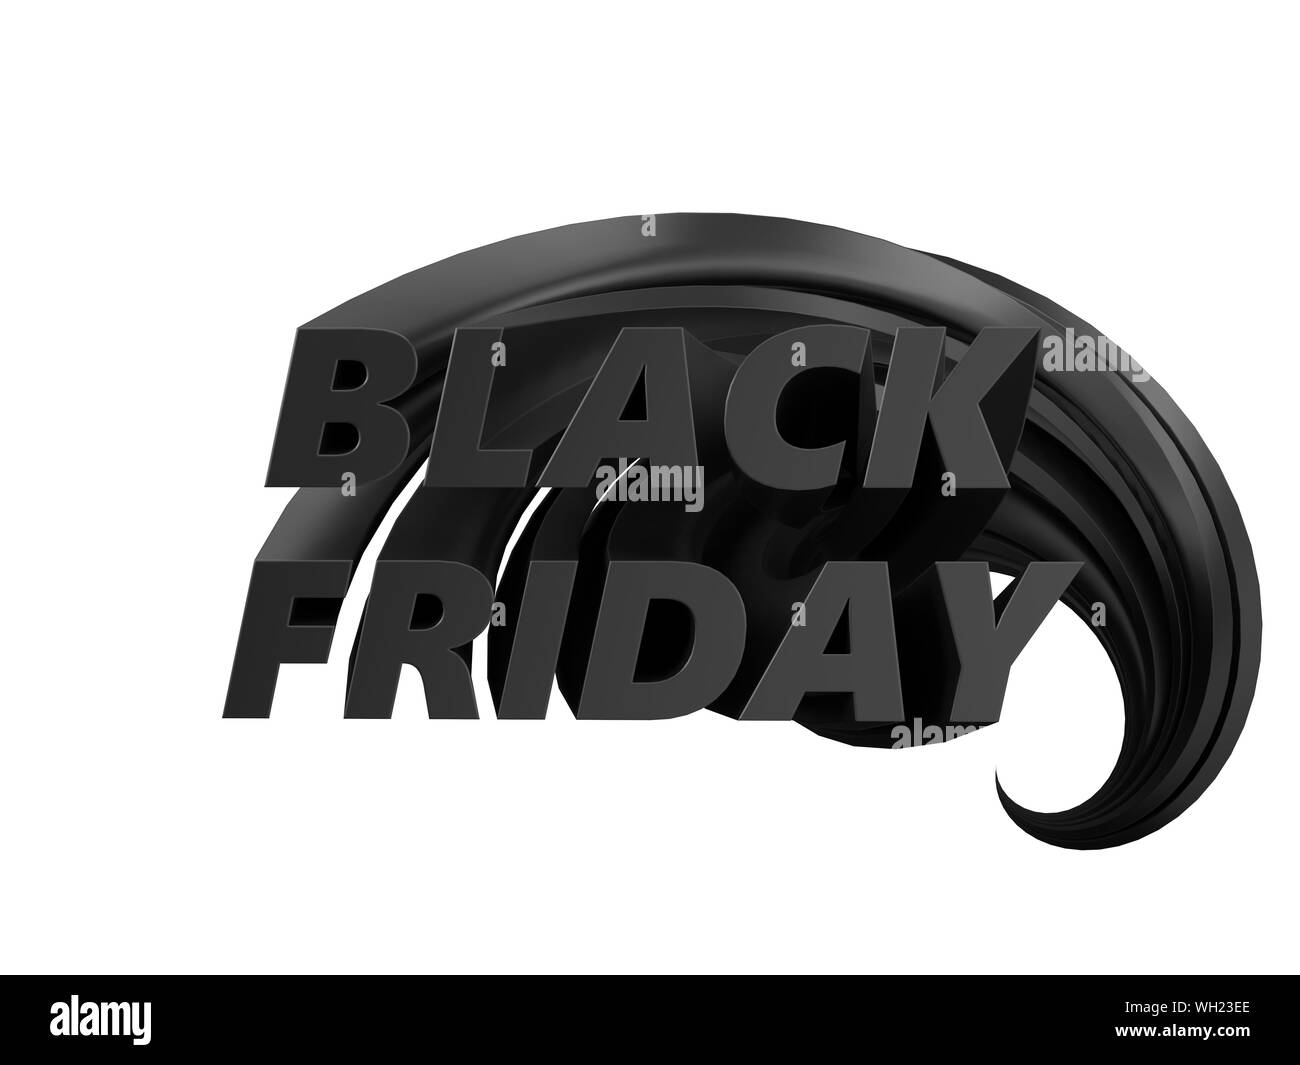 black friday with long text body. text rises from background to front. 3d illustration Stock Photo